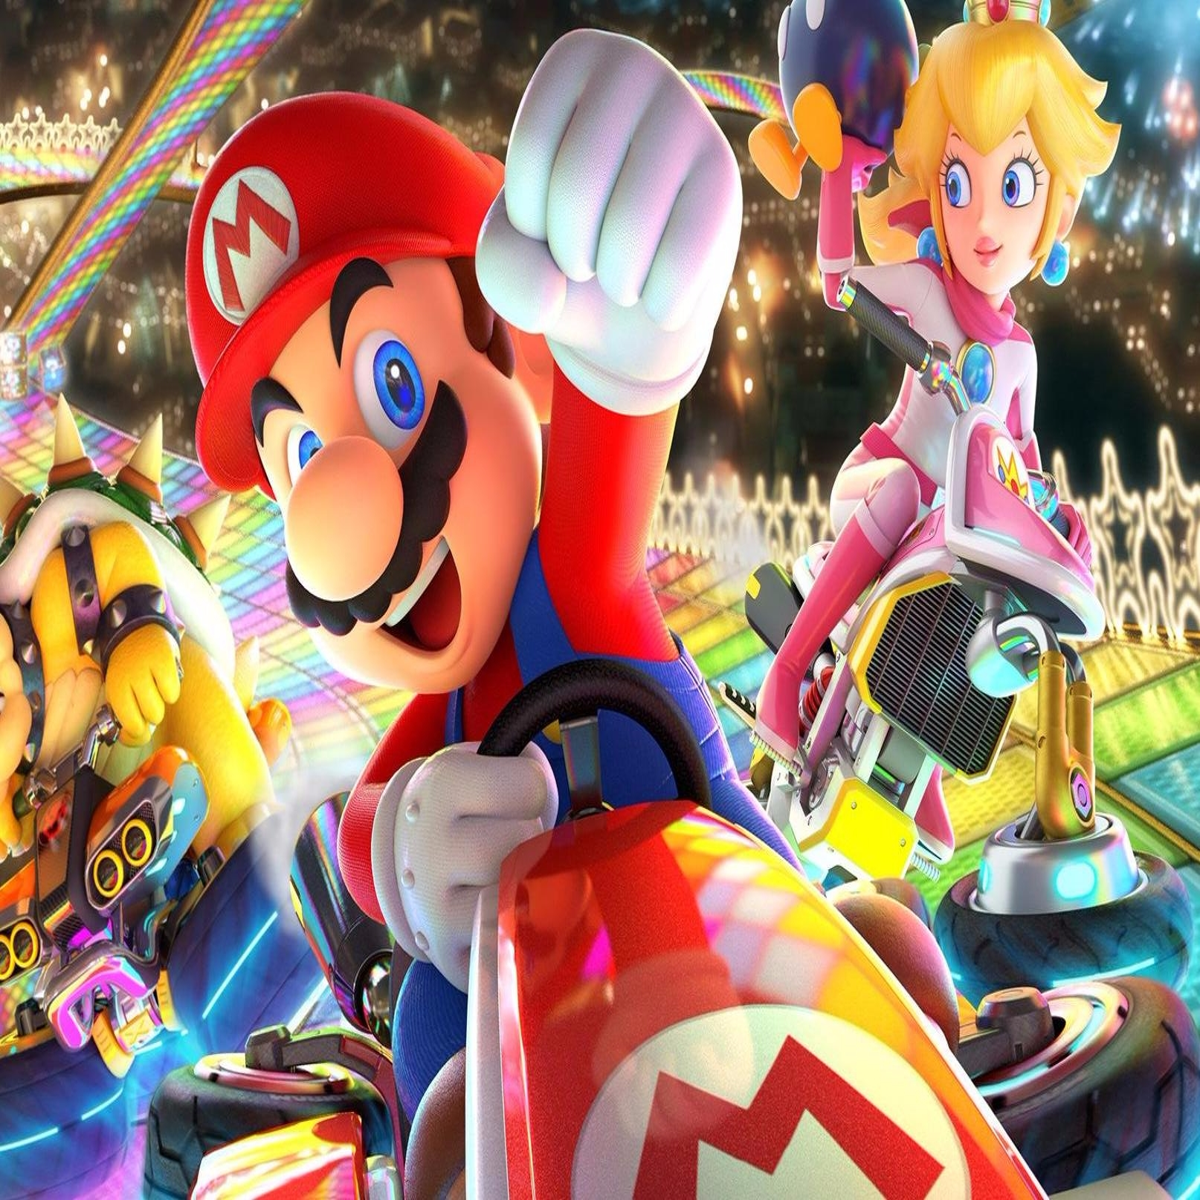 Mario Kart 8 Deluxe: here's some screens and a video of it running